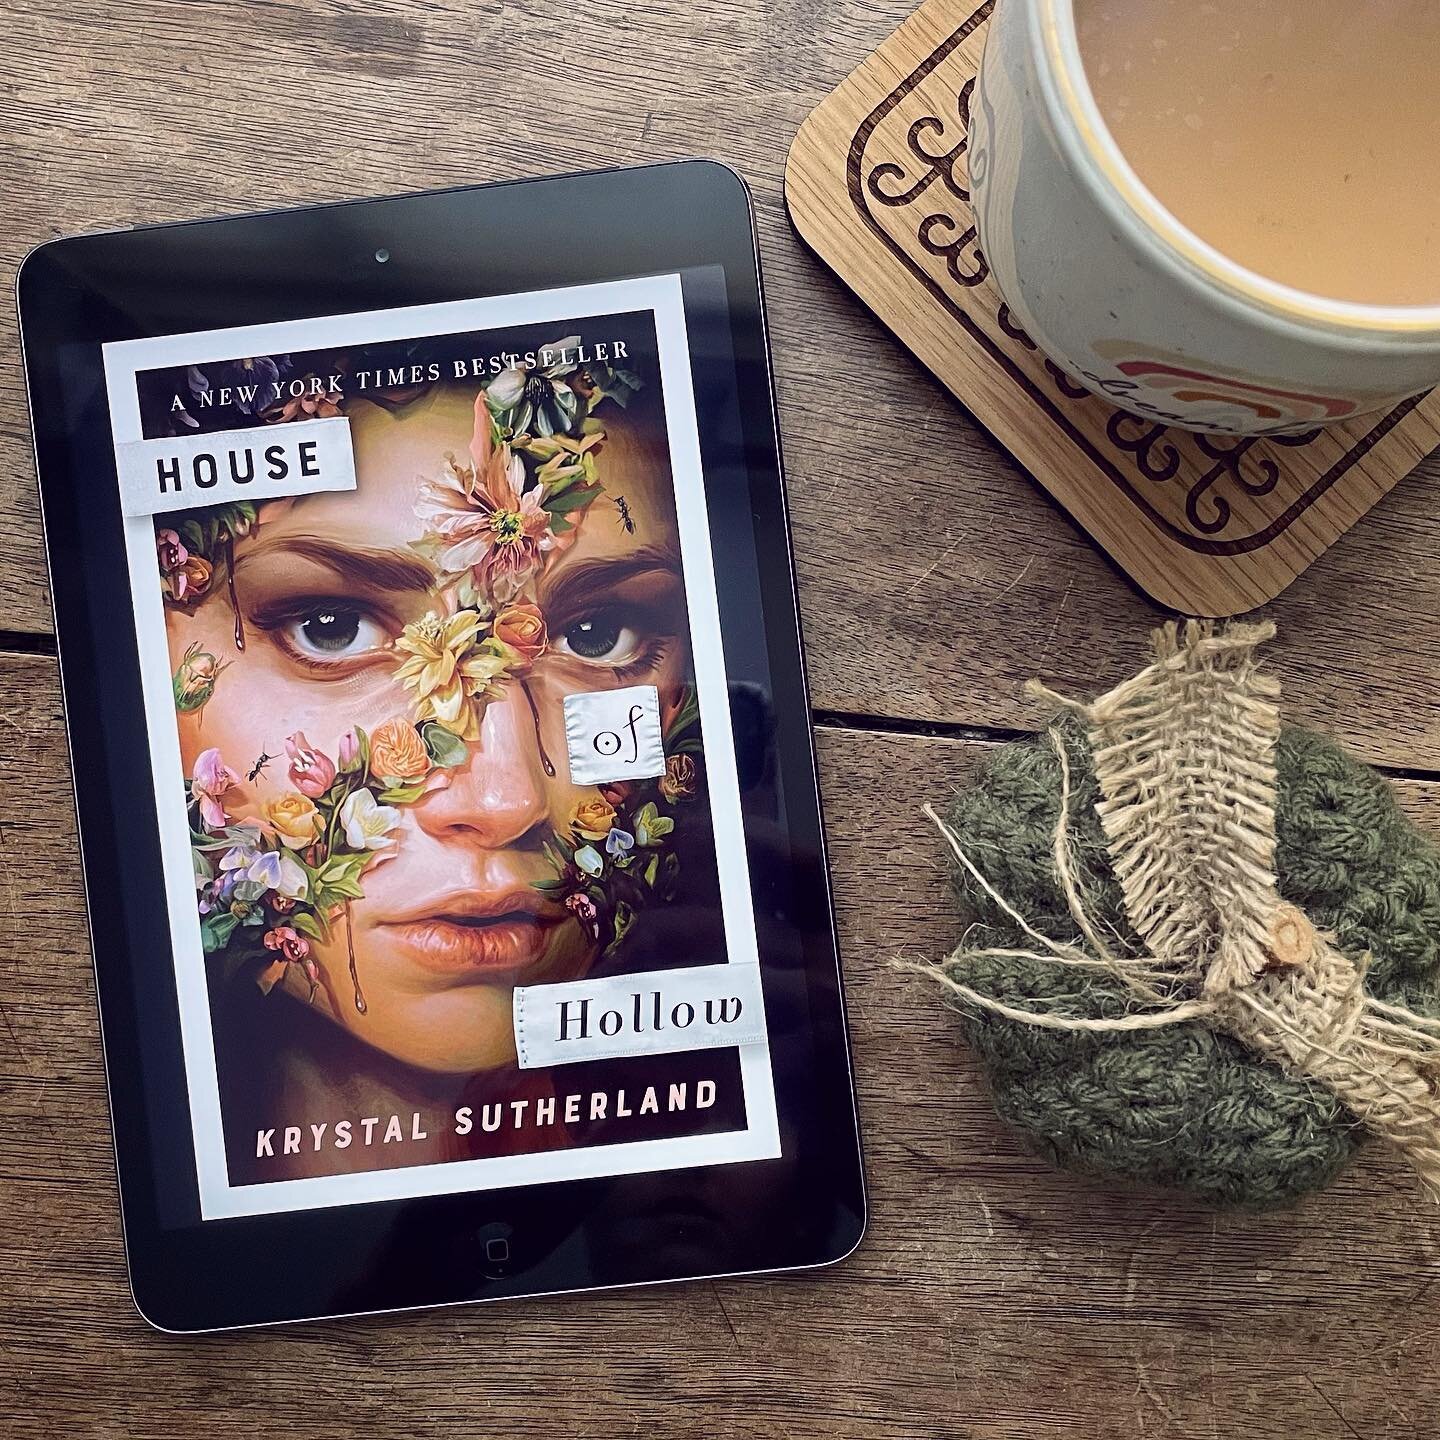 This weekend I finished reading &lsquo;House of Hollow&rsquo; by Krystal Sutherland, which I had had on my spooky season TBR for awhile now. I went into it unsure what to expect and I ended up loving it. The marketing calls it a &lsquo;dark fairy tal